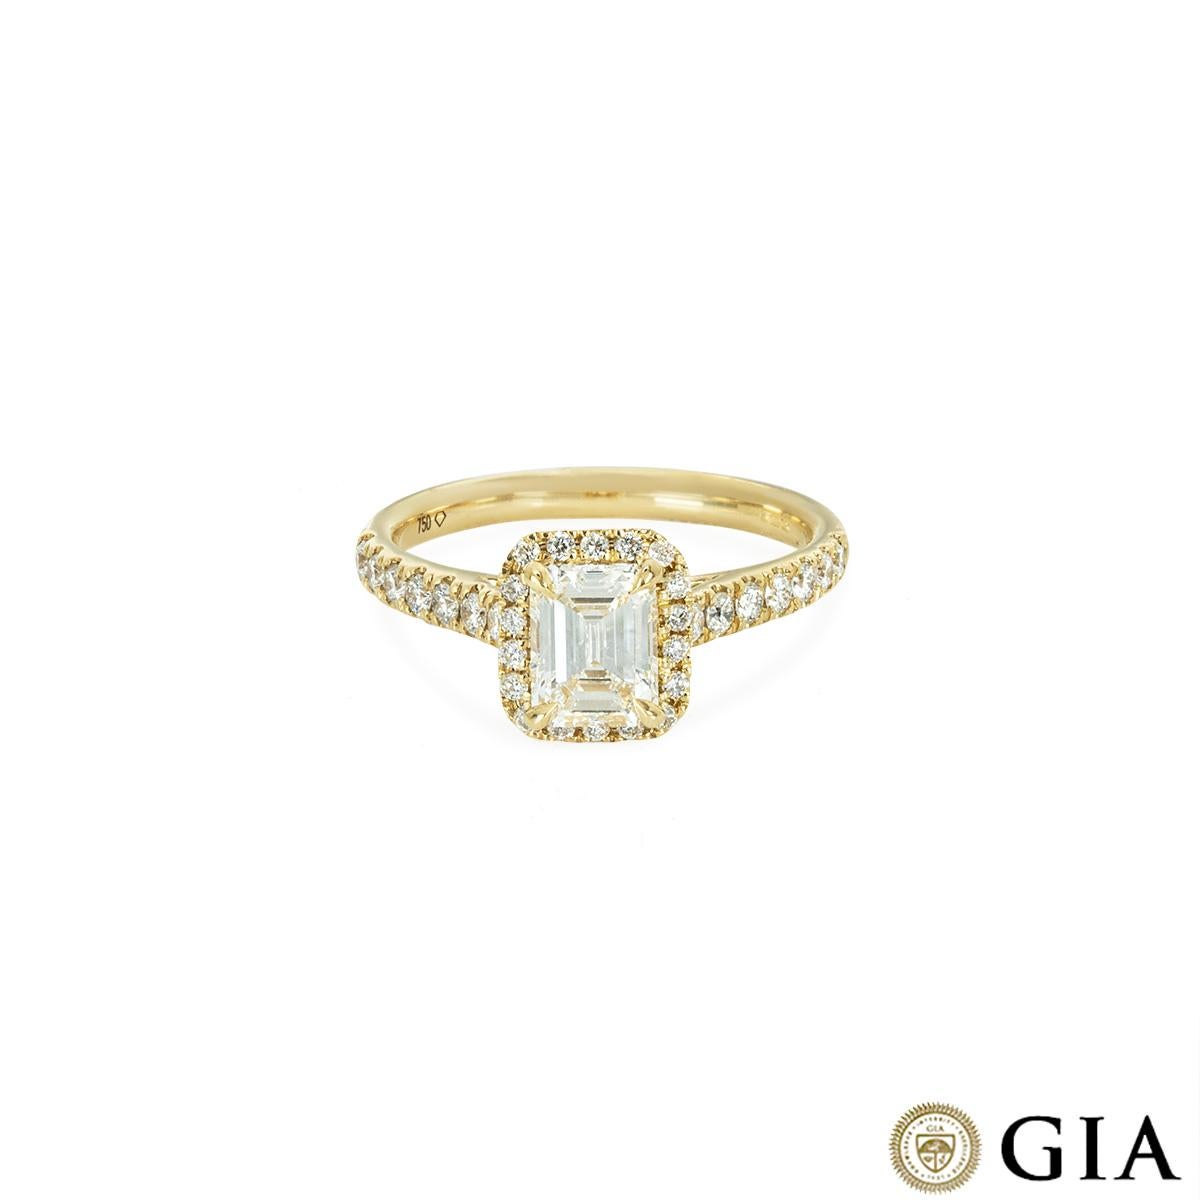 GIA Certified Yellow Gold Emerald Cut Diamond Ring 0.95ct F/VVS1 In New Condition For Sale In London, GB